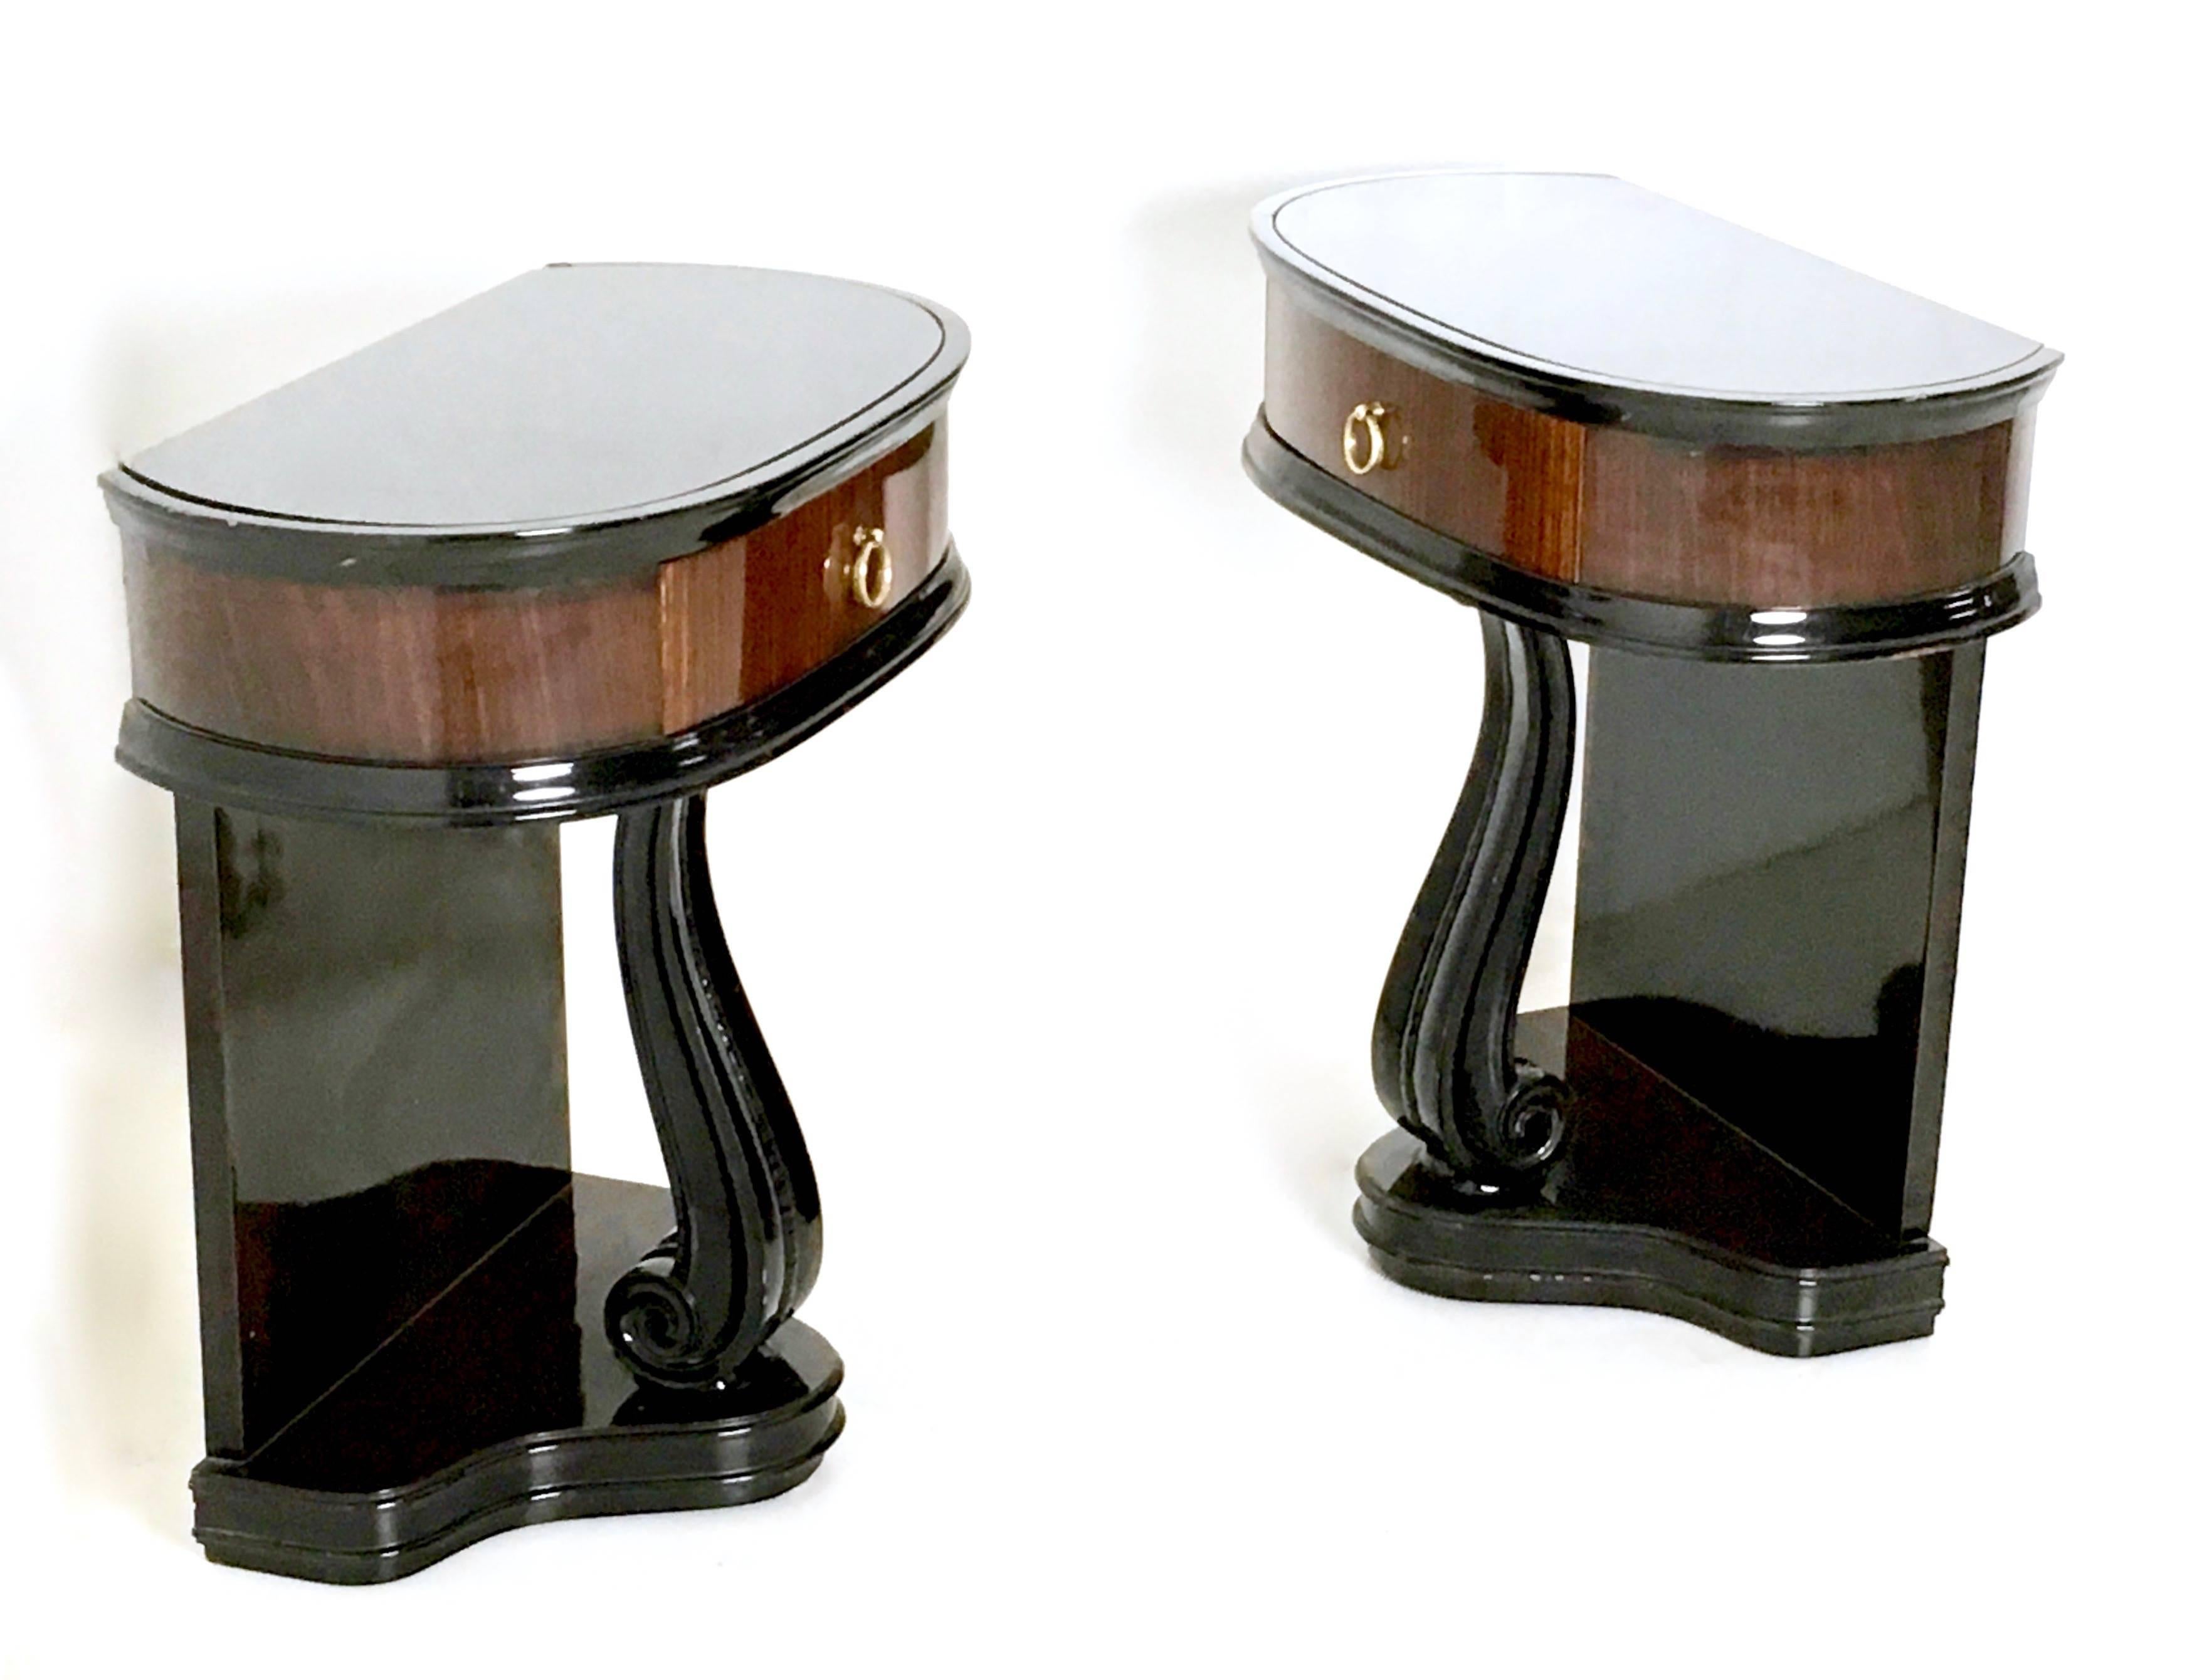 Made in lacquered and ebonized wood.
They feature a back-painted glass top and brass parts.
In excellent original condition.